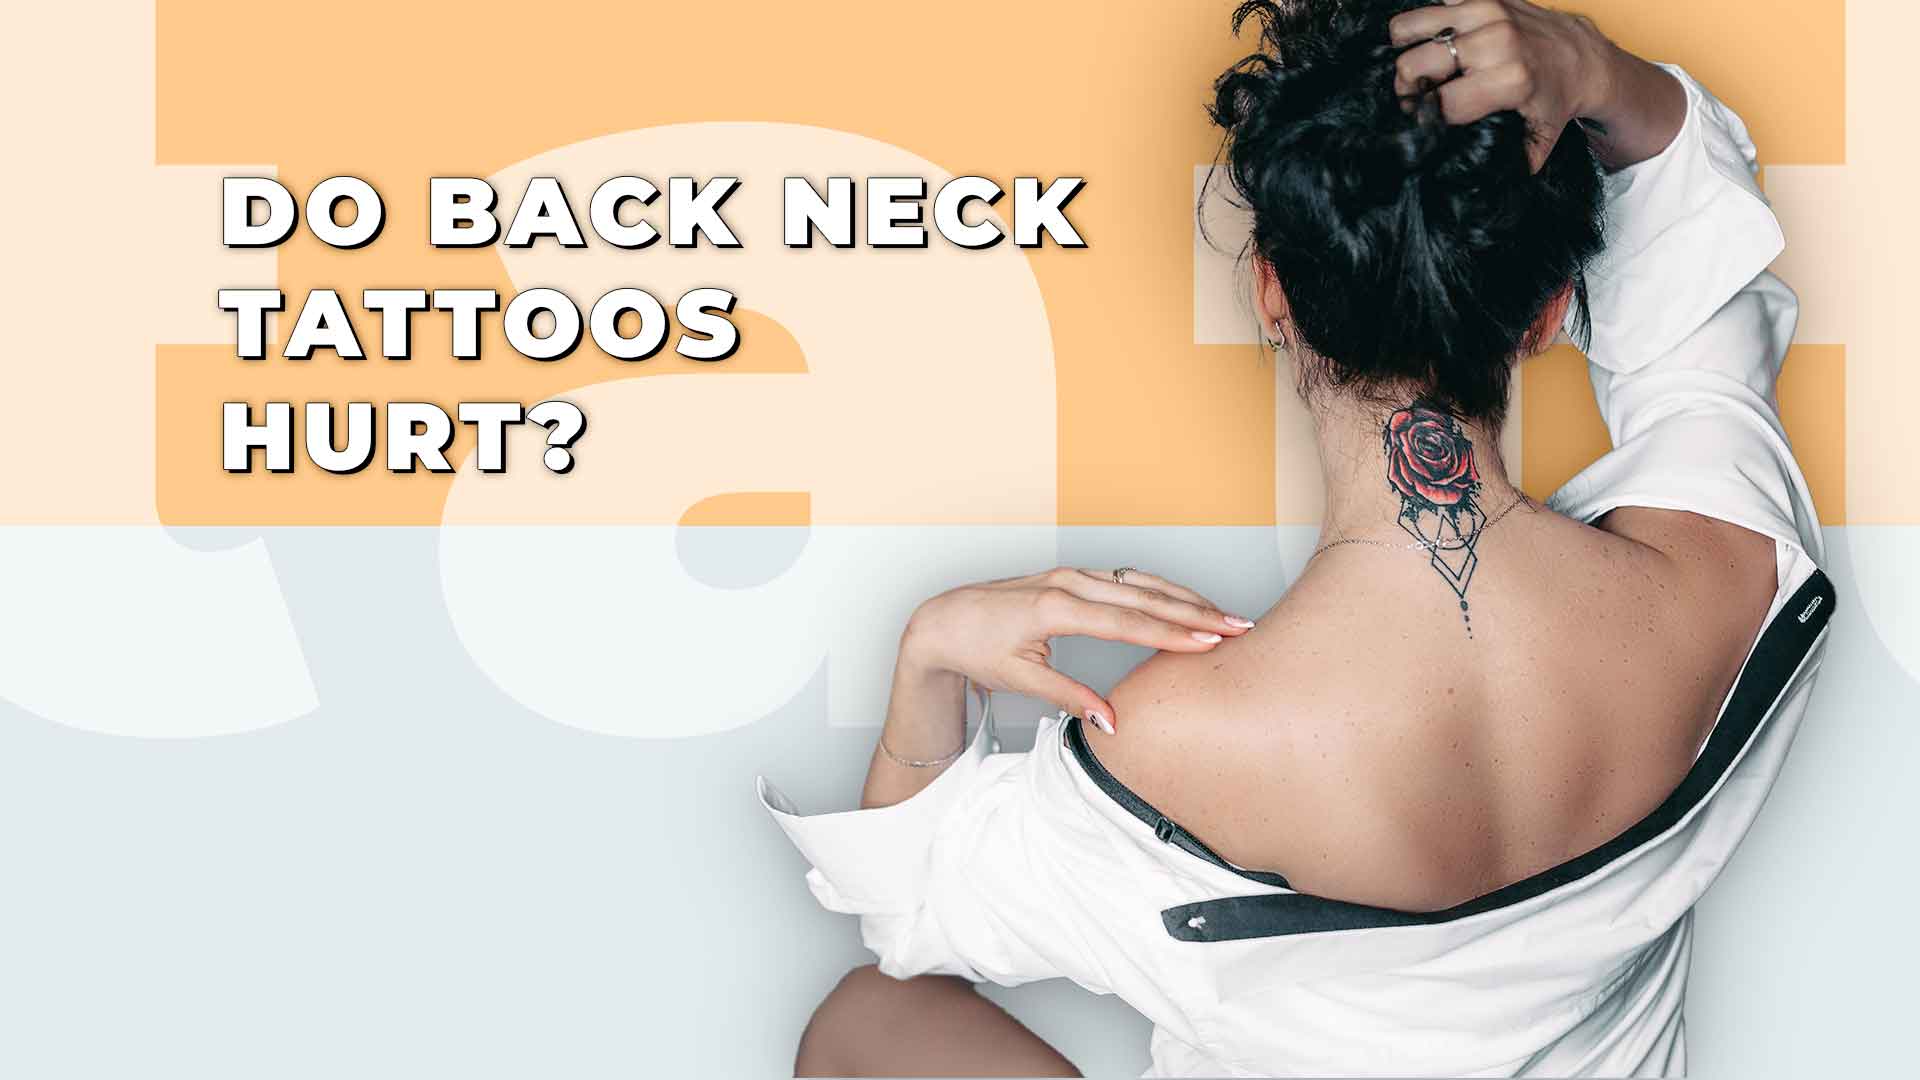 How to Safely Wash and Care for a Neck Tattoo: 14 Steps - wikiHow